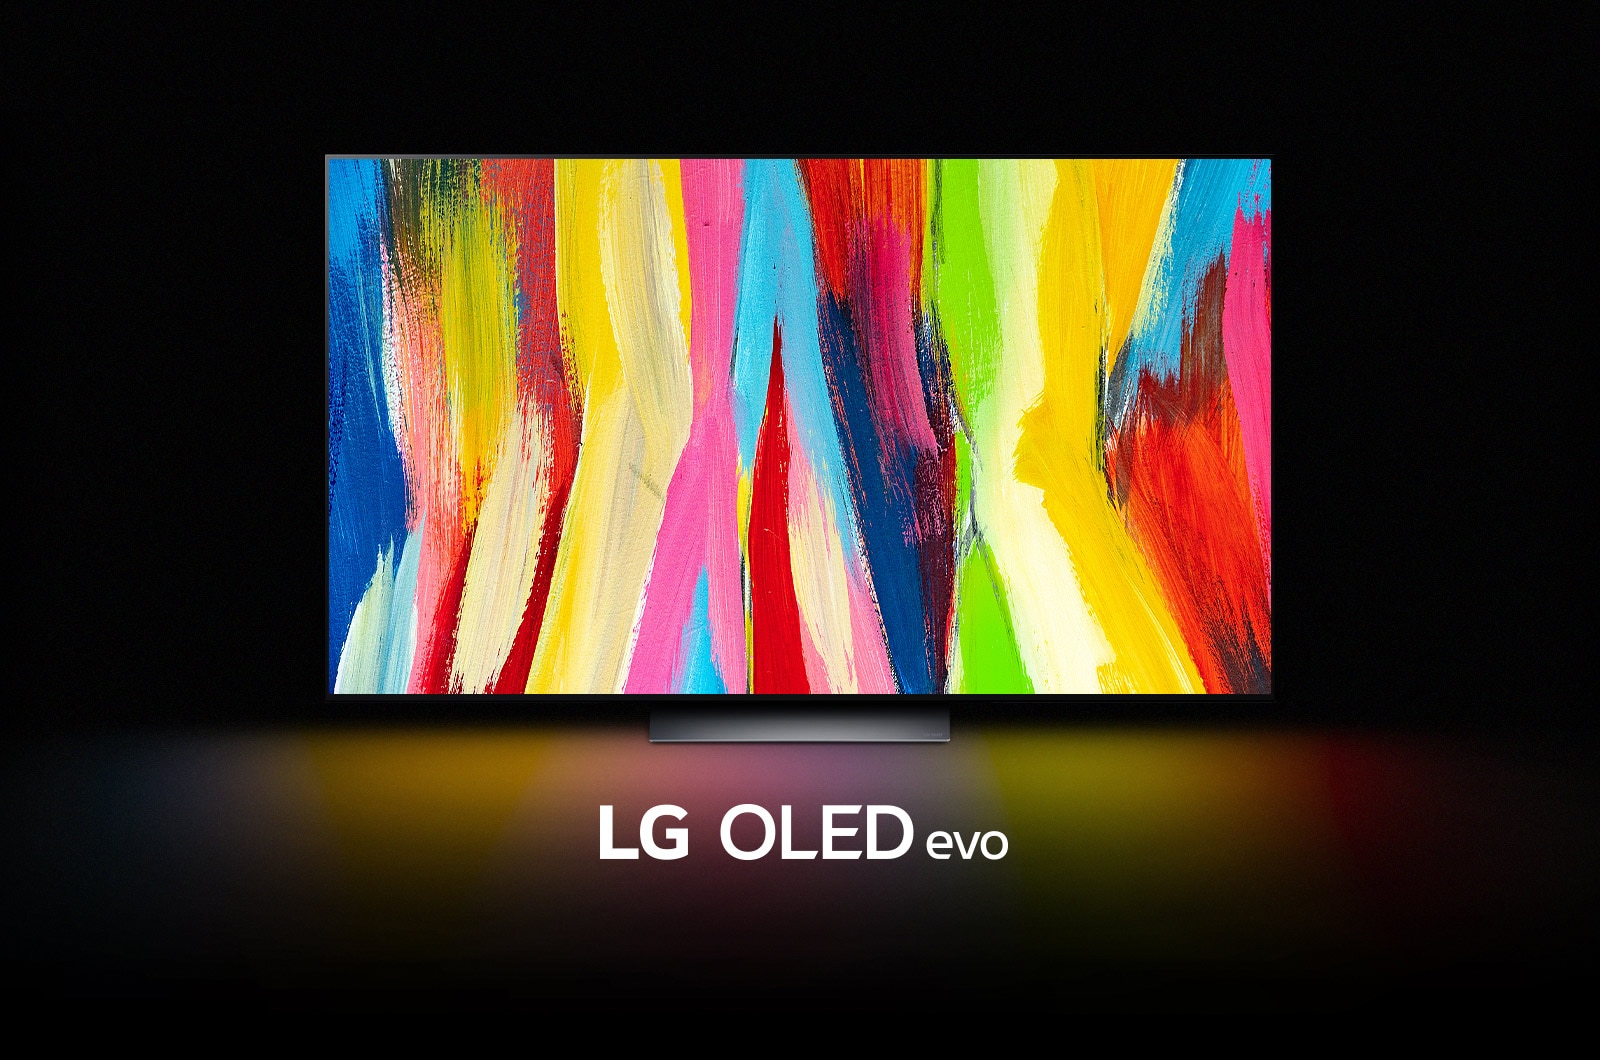 An LG OLED C2 is in a dark room with a colorful abstract artwork of vertical lines on its display and the words "LG OLED evo" underneath.